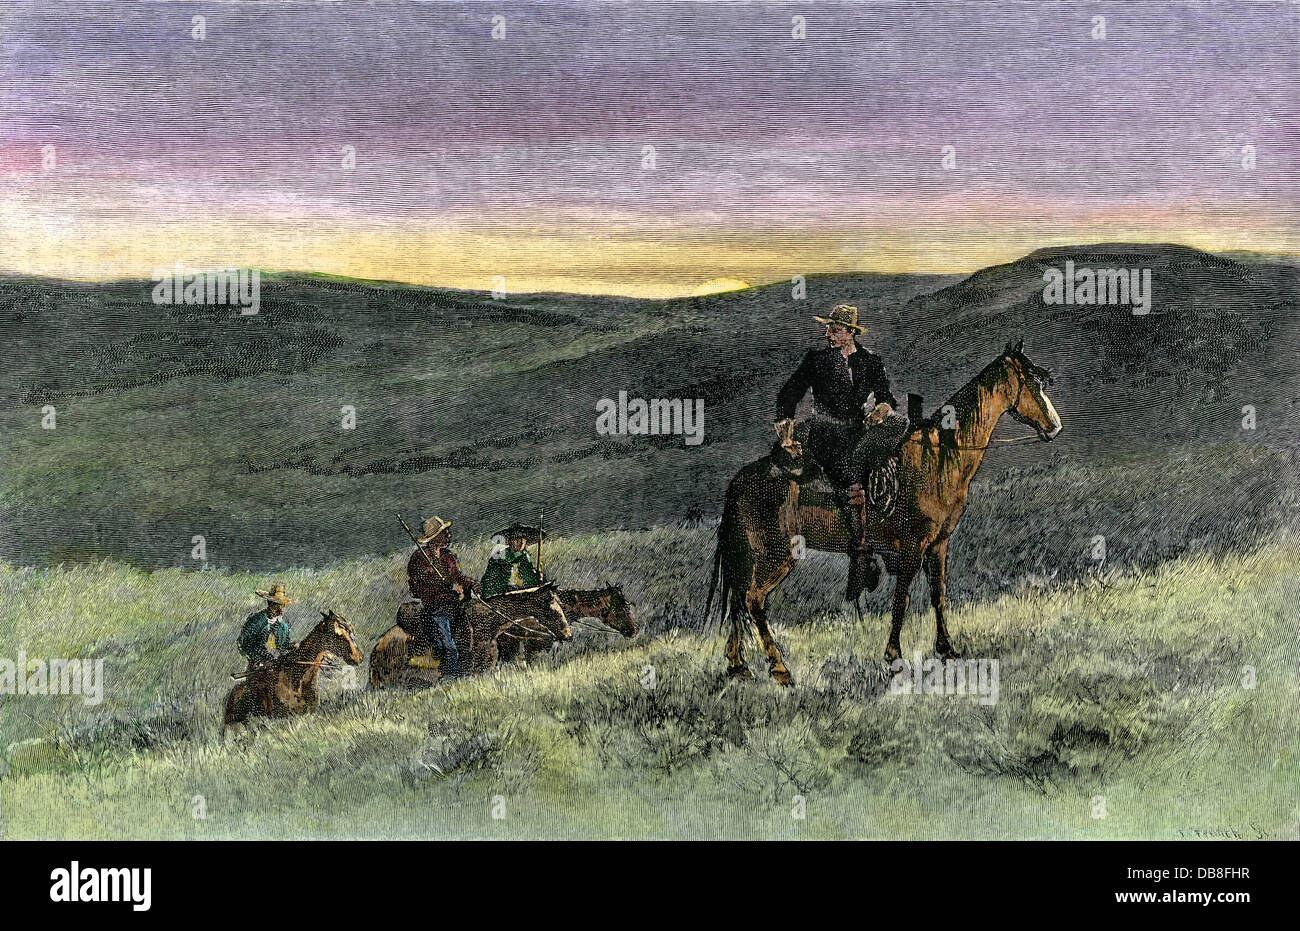 Sheriff's posse pursuing a suspect, western frontier, 1800s. Hand-colored woodcut Stock Photo